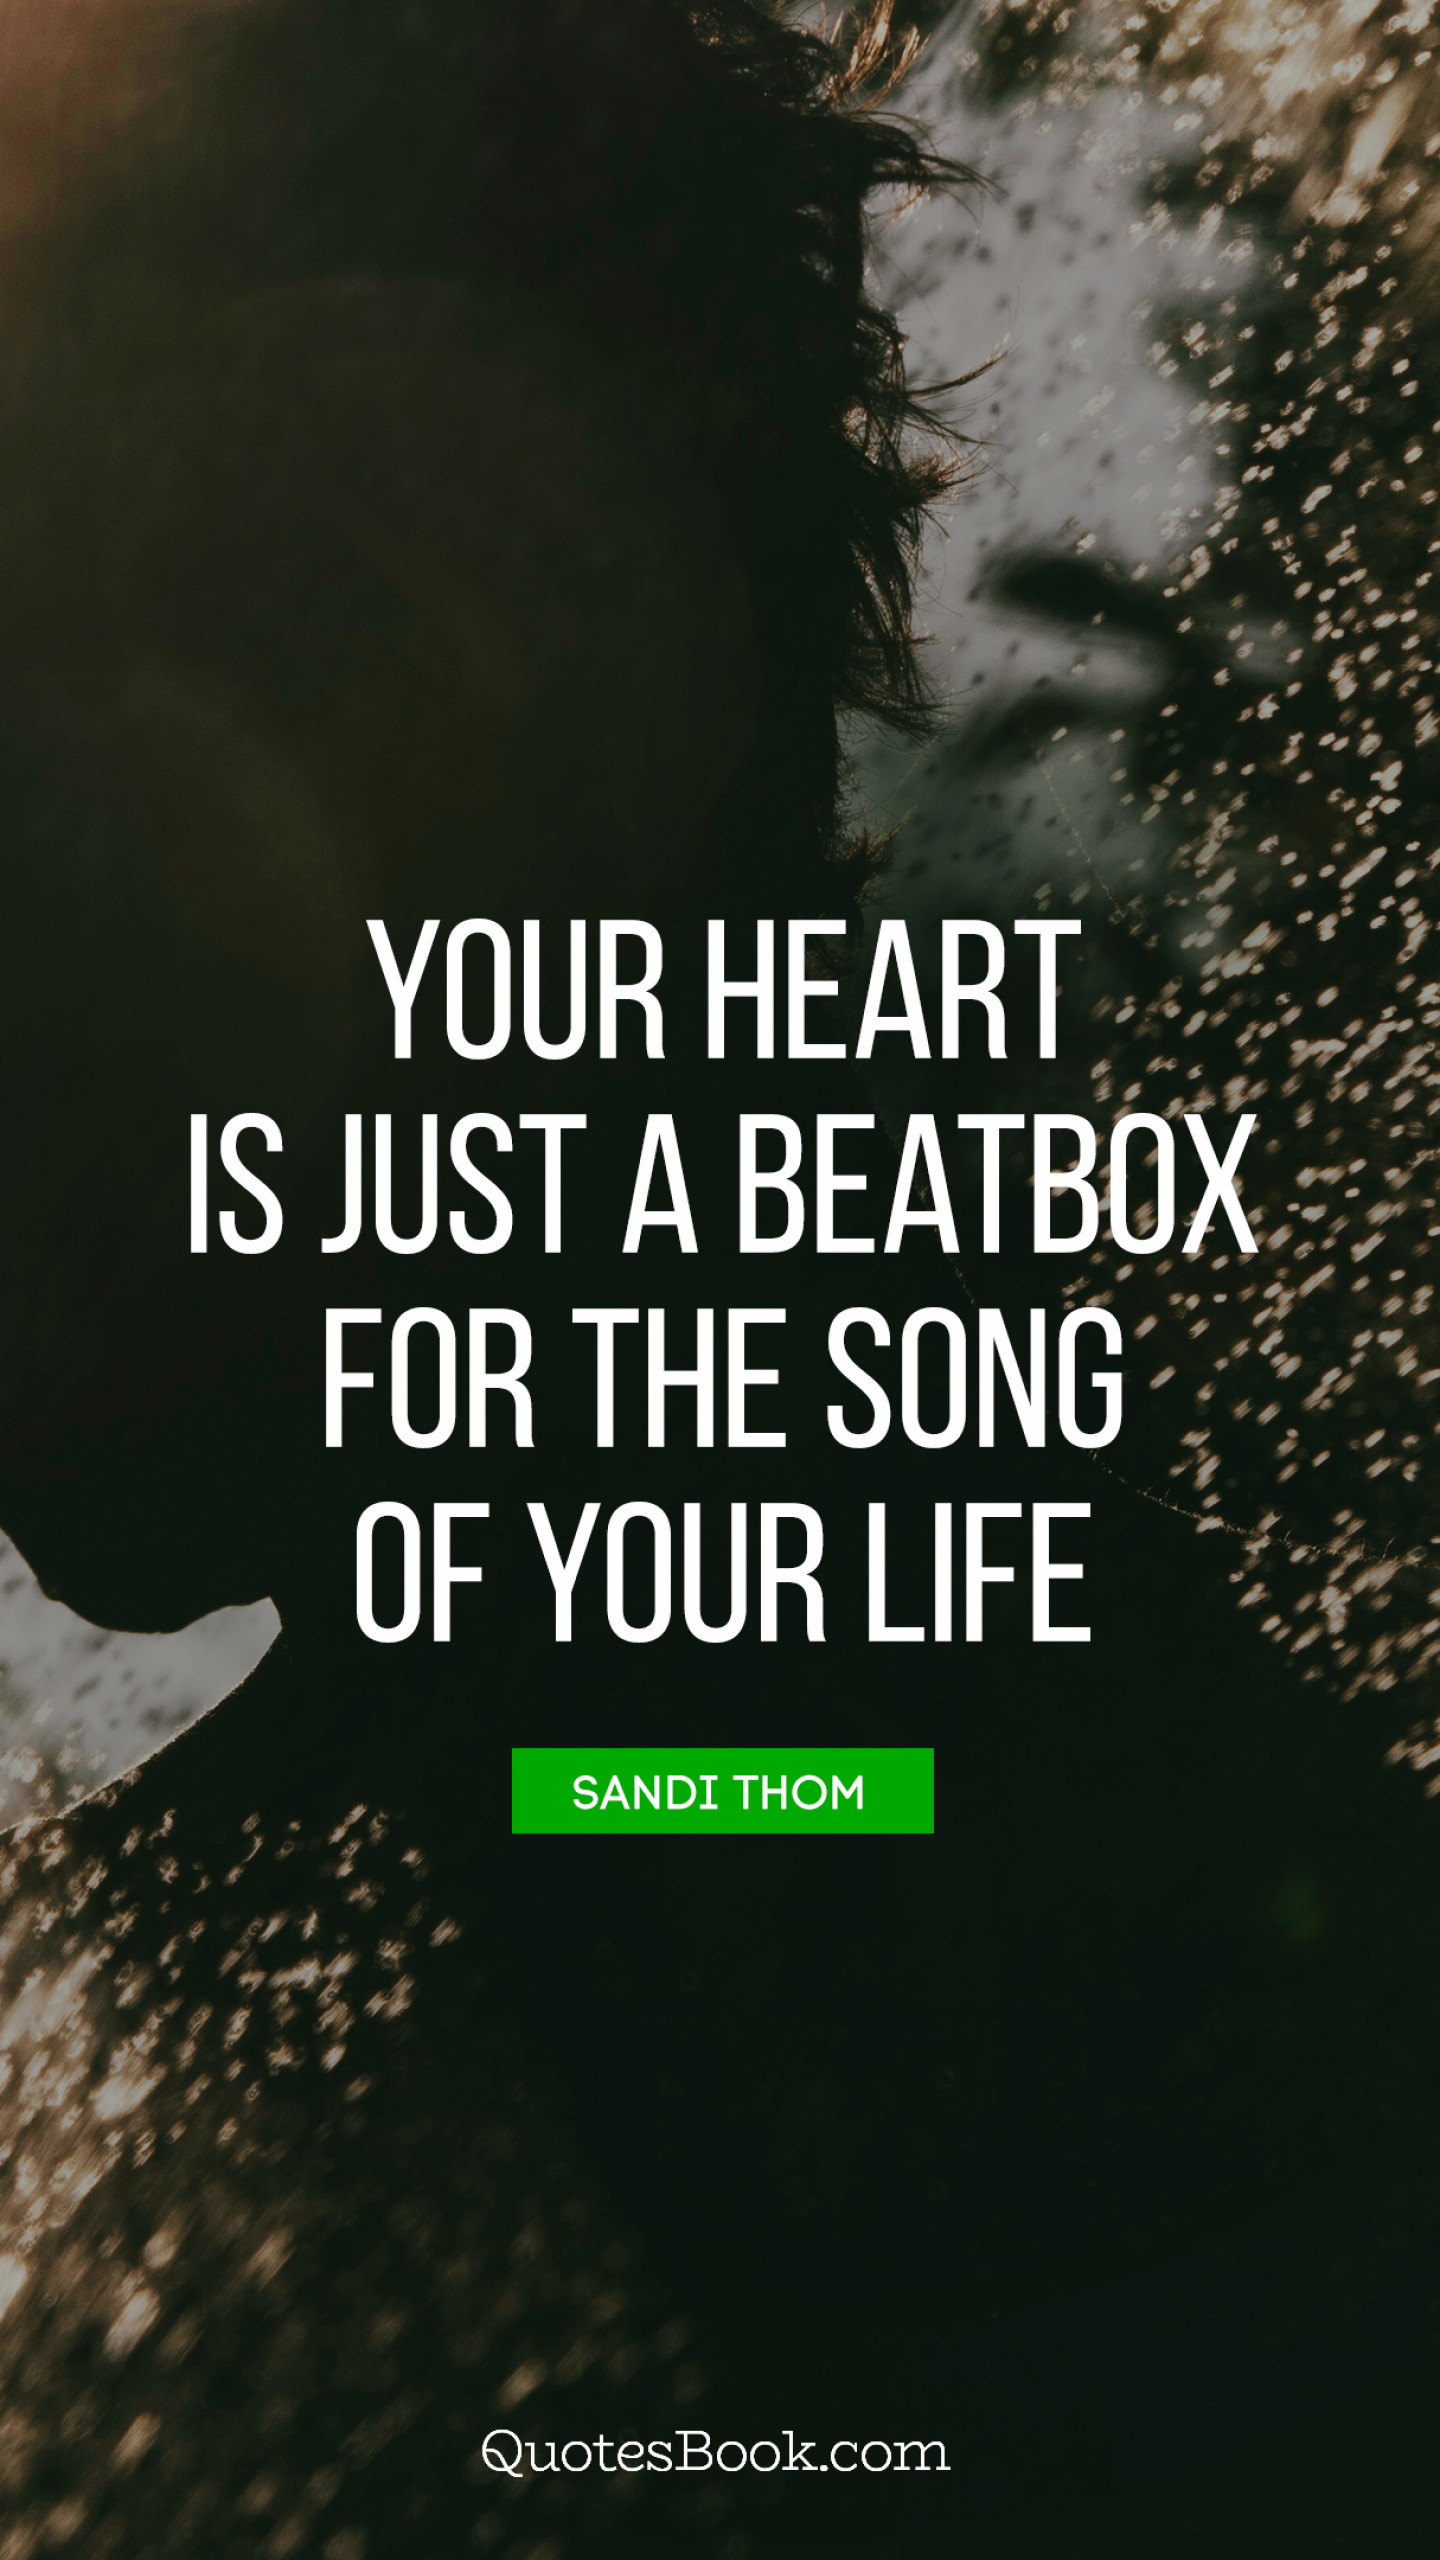 Your heart is just a beatbox for the of your life. - Quote by Sandi Thom QuotesBook